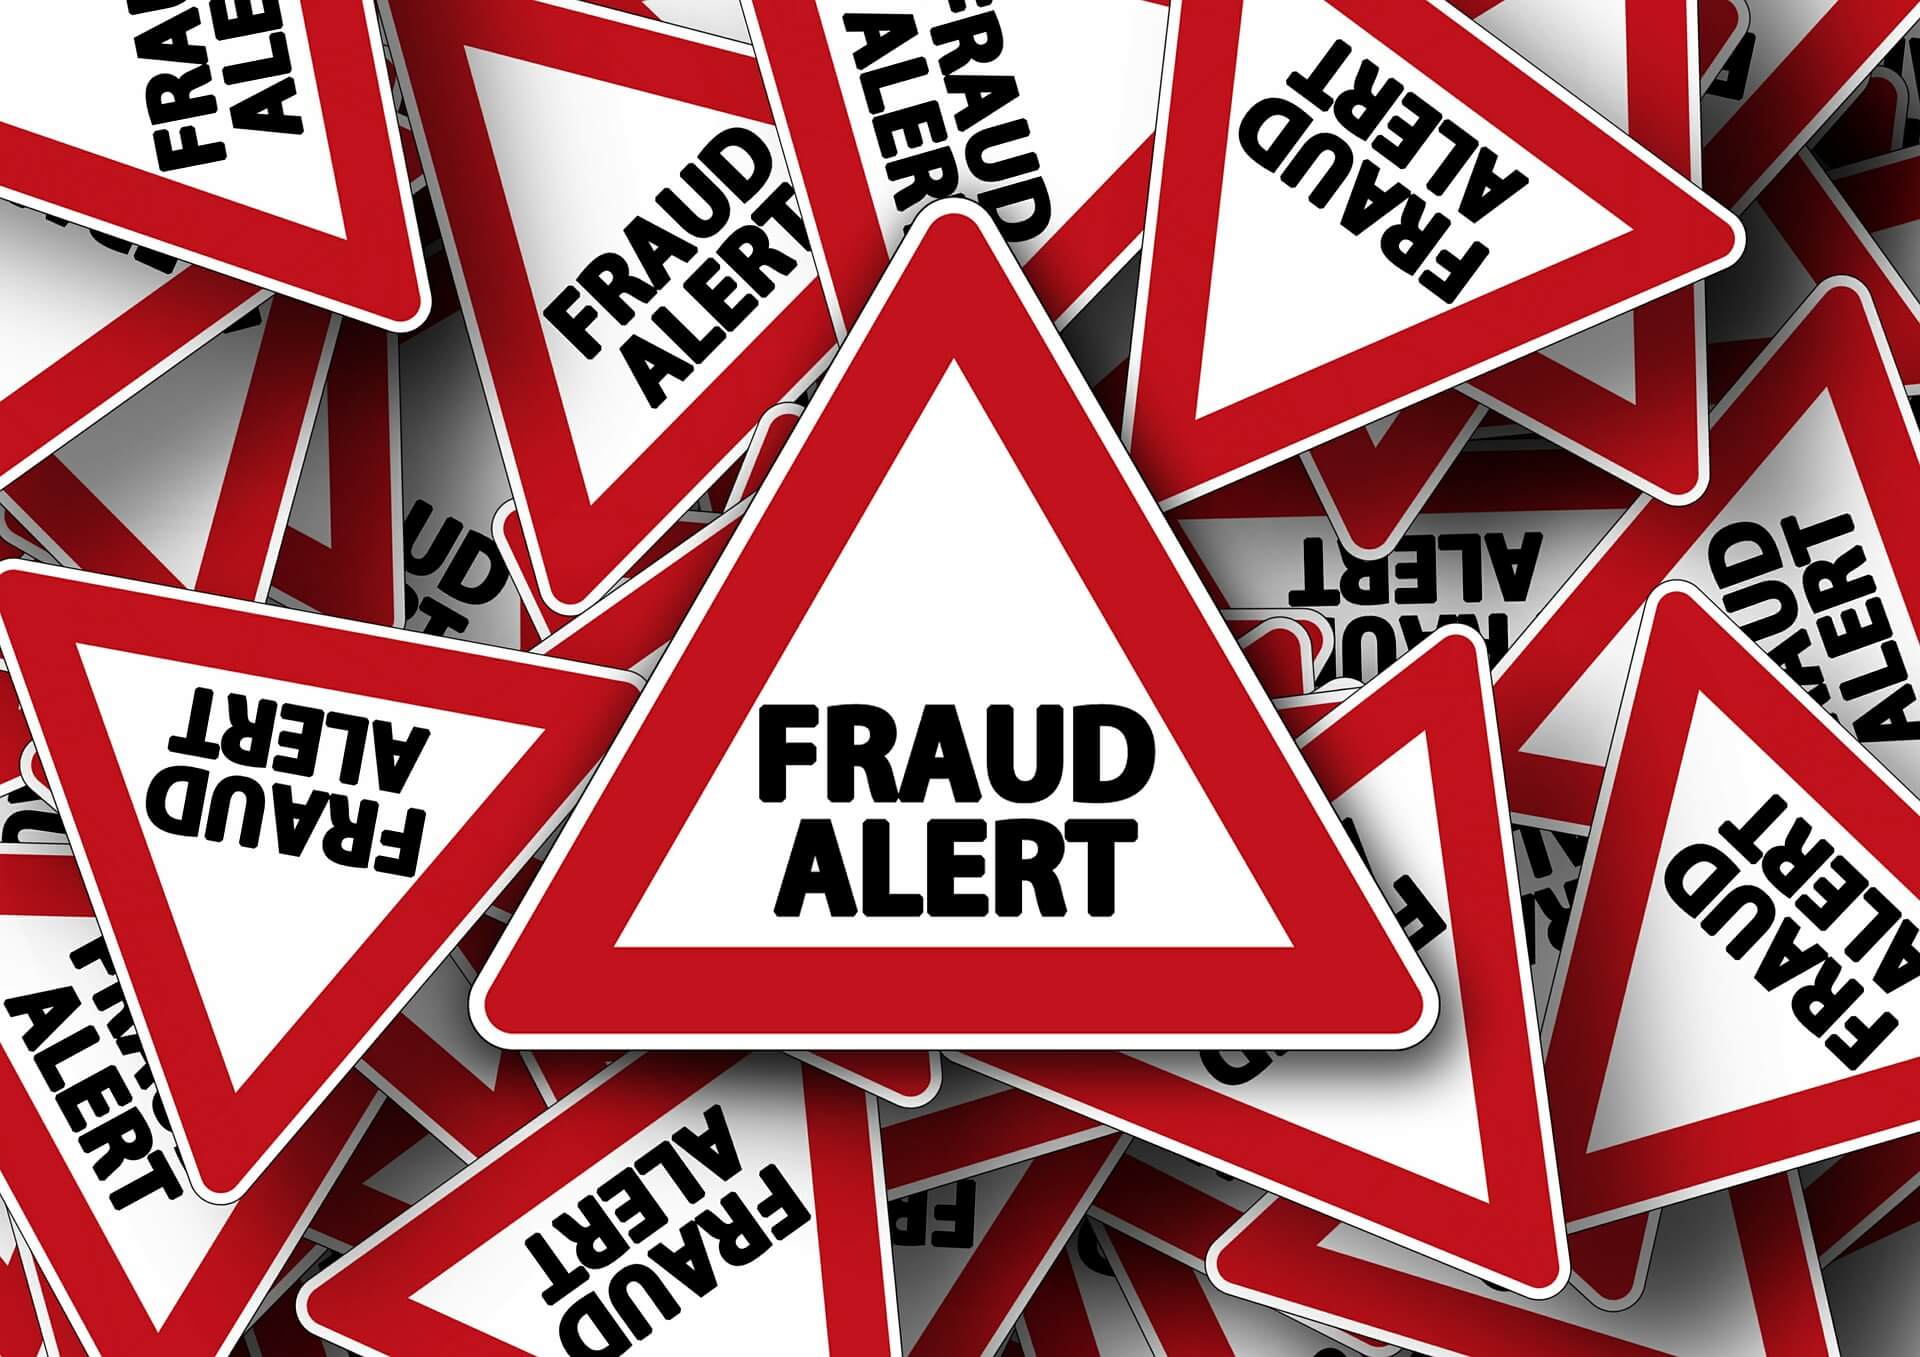 Travel Alert! - Don't be victim to travel fraud